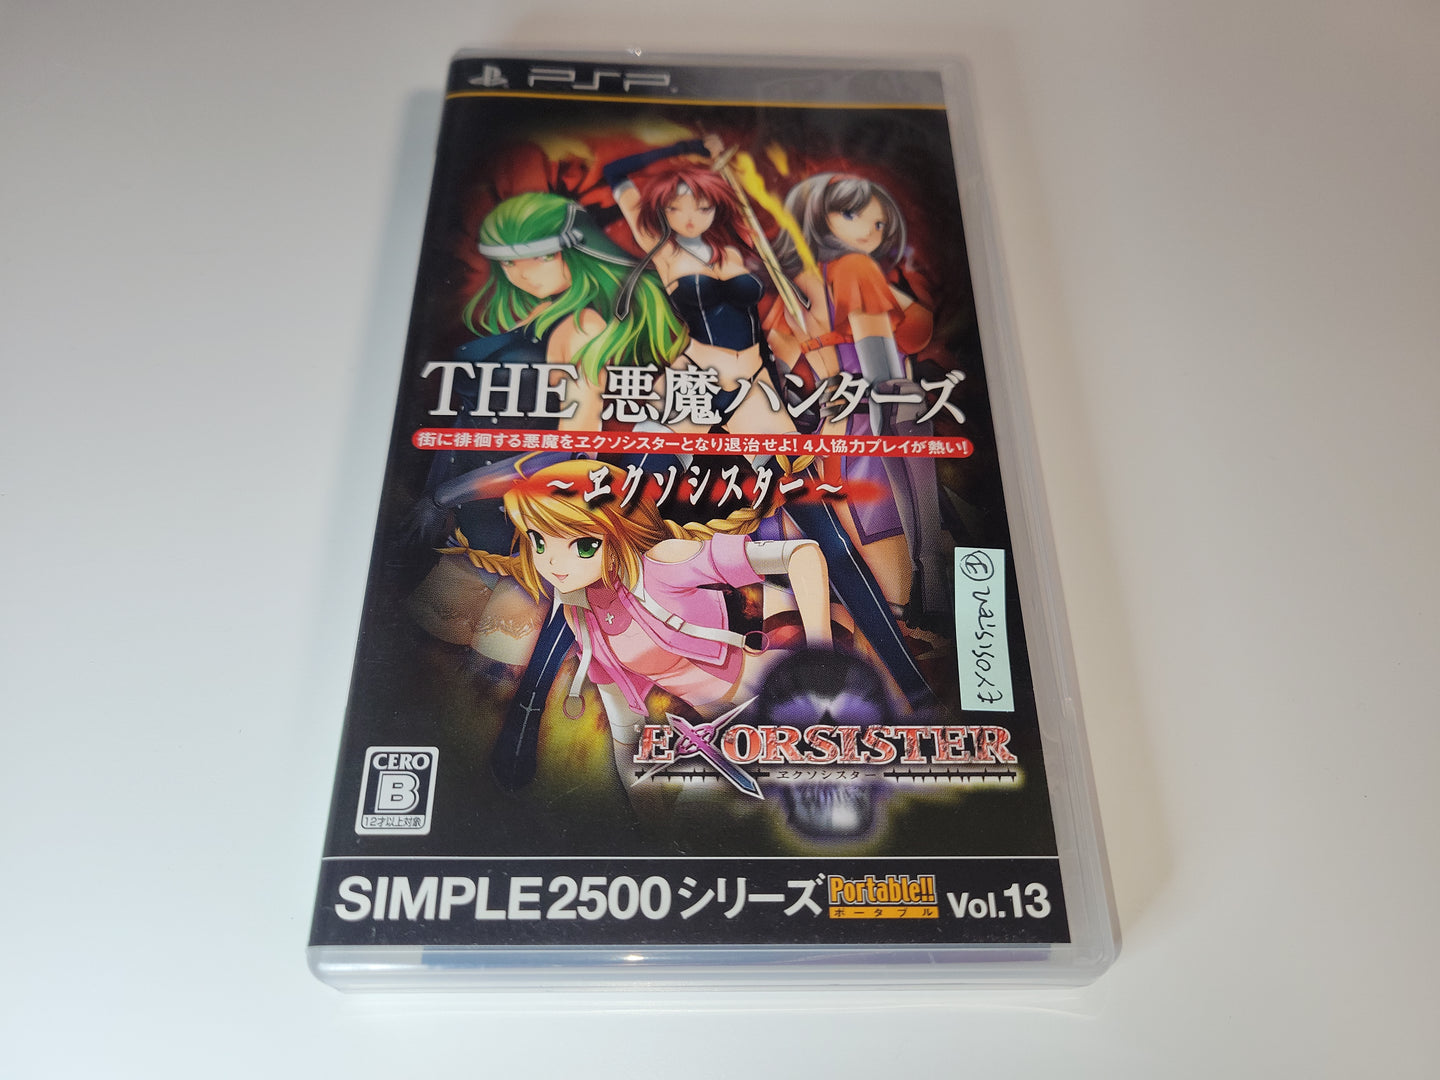 The Demon Hunters Exosister
 - Sony PSP Playstation Portable